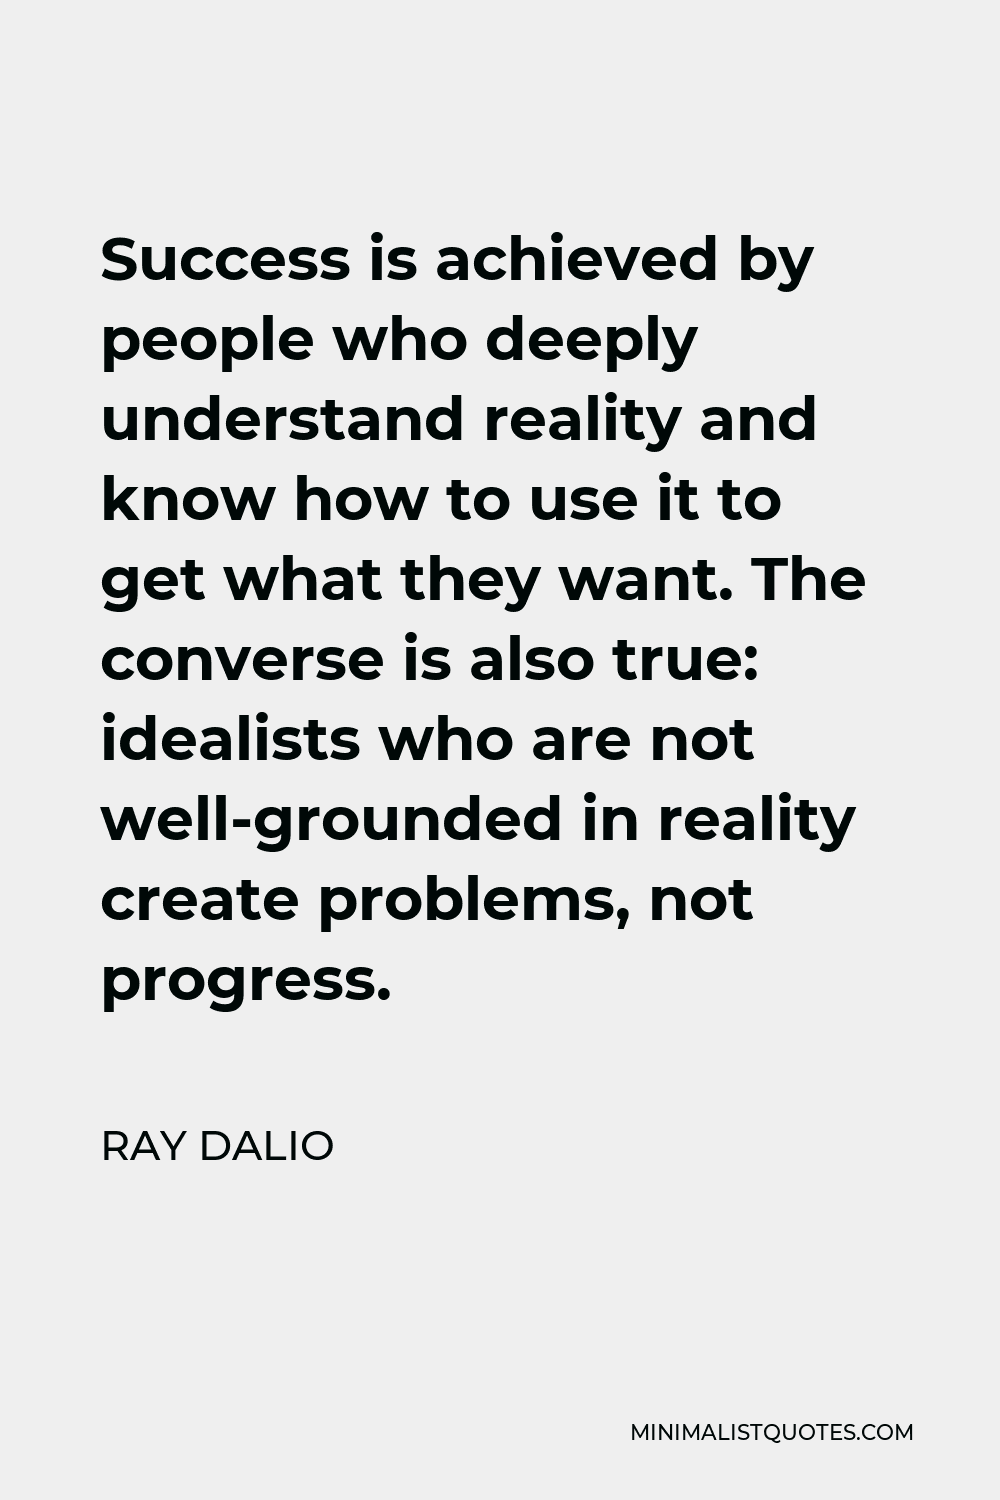 Ray Dalio Quote - Success is achieved by people who deeply understand reality and know how to use it to get what they want. The converse is also true: idealists who are not well-grounded in reality create problems, not progress.